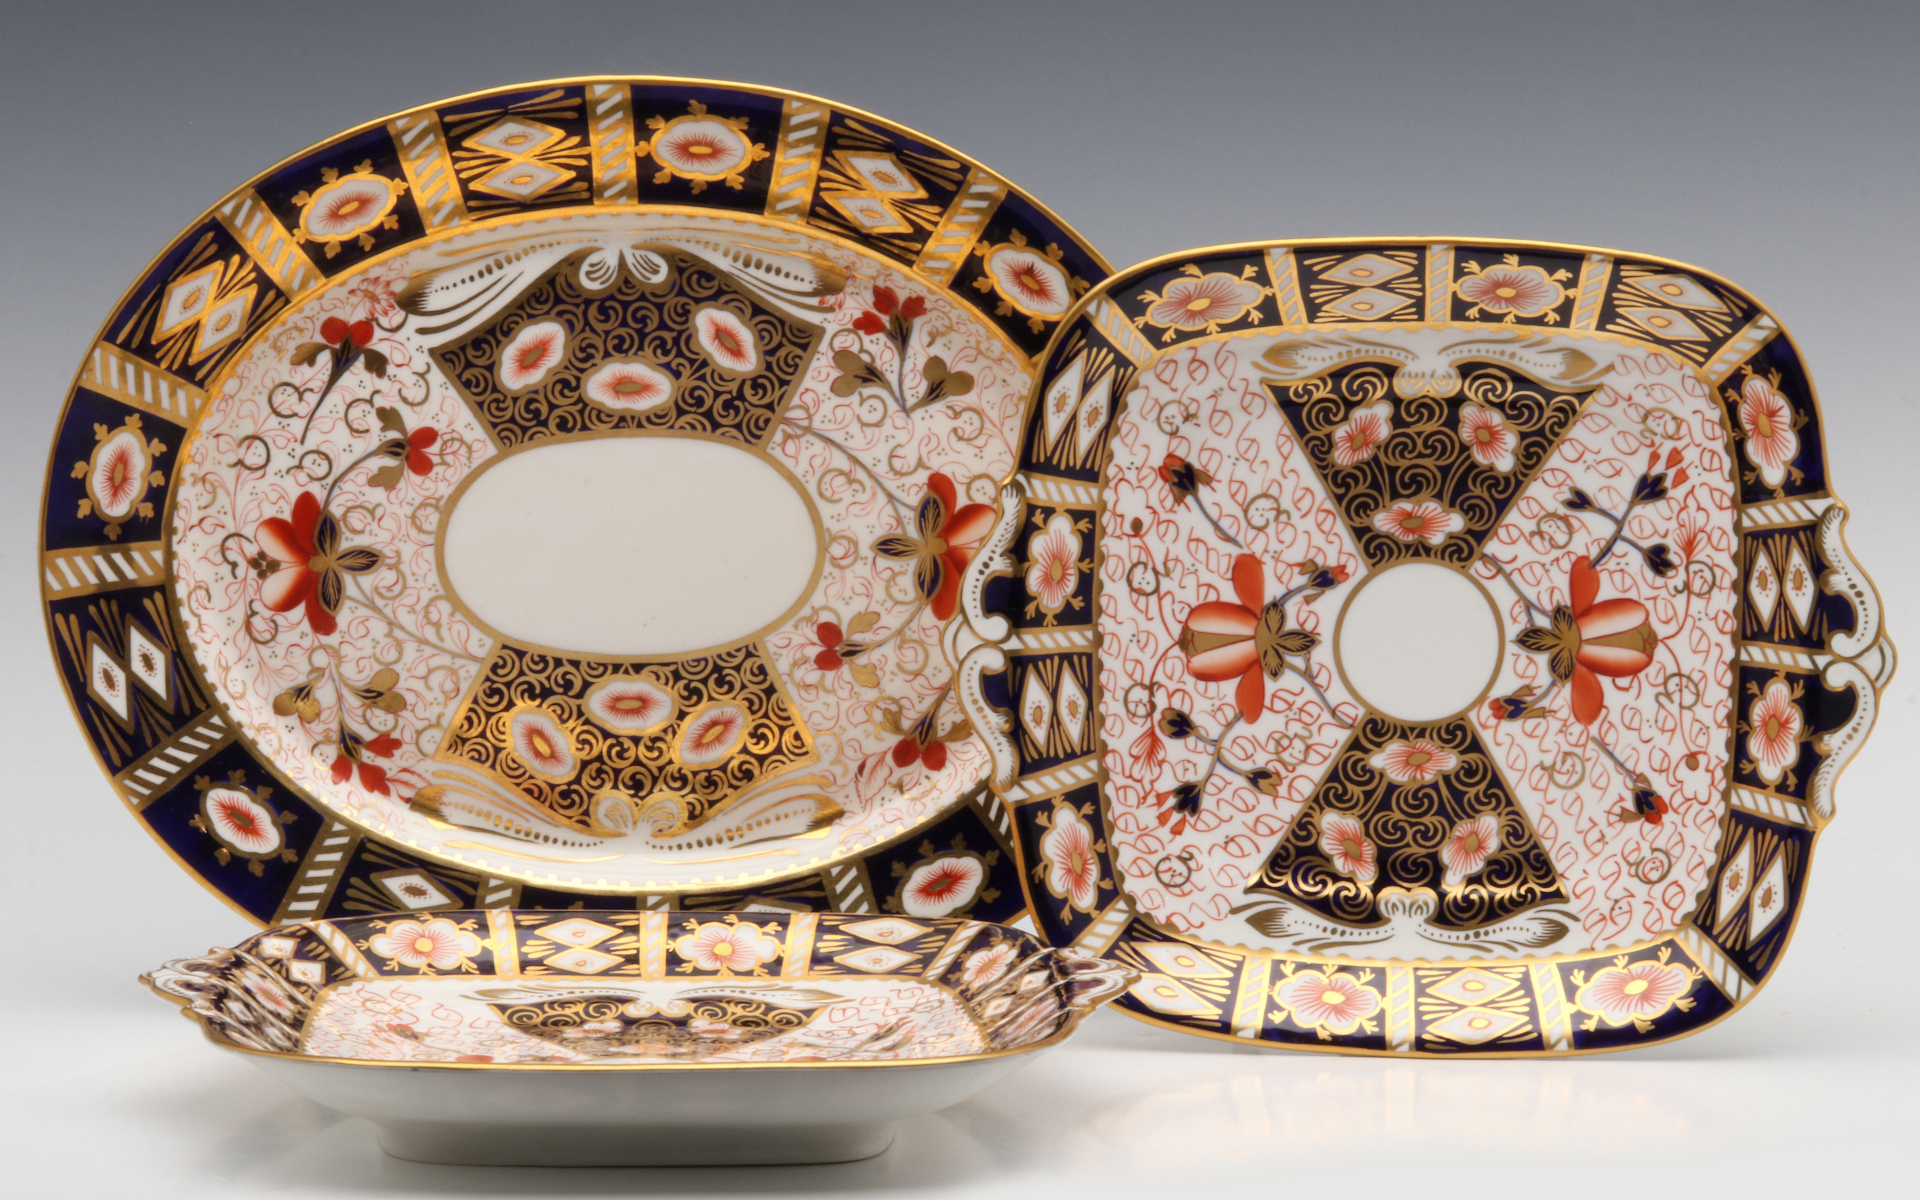 ROYAL CROWN DERBY TWO-HANDLED TRAYS AND SIMILAR PLATTER